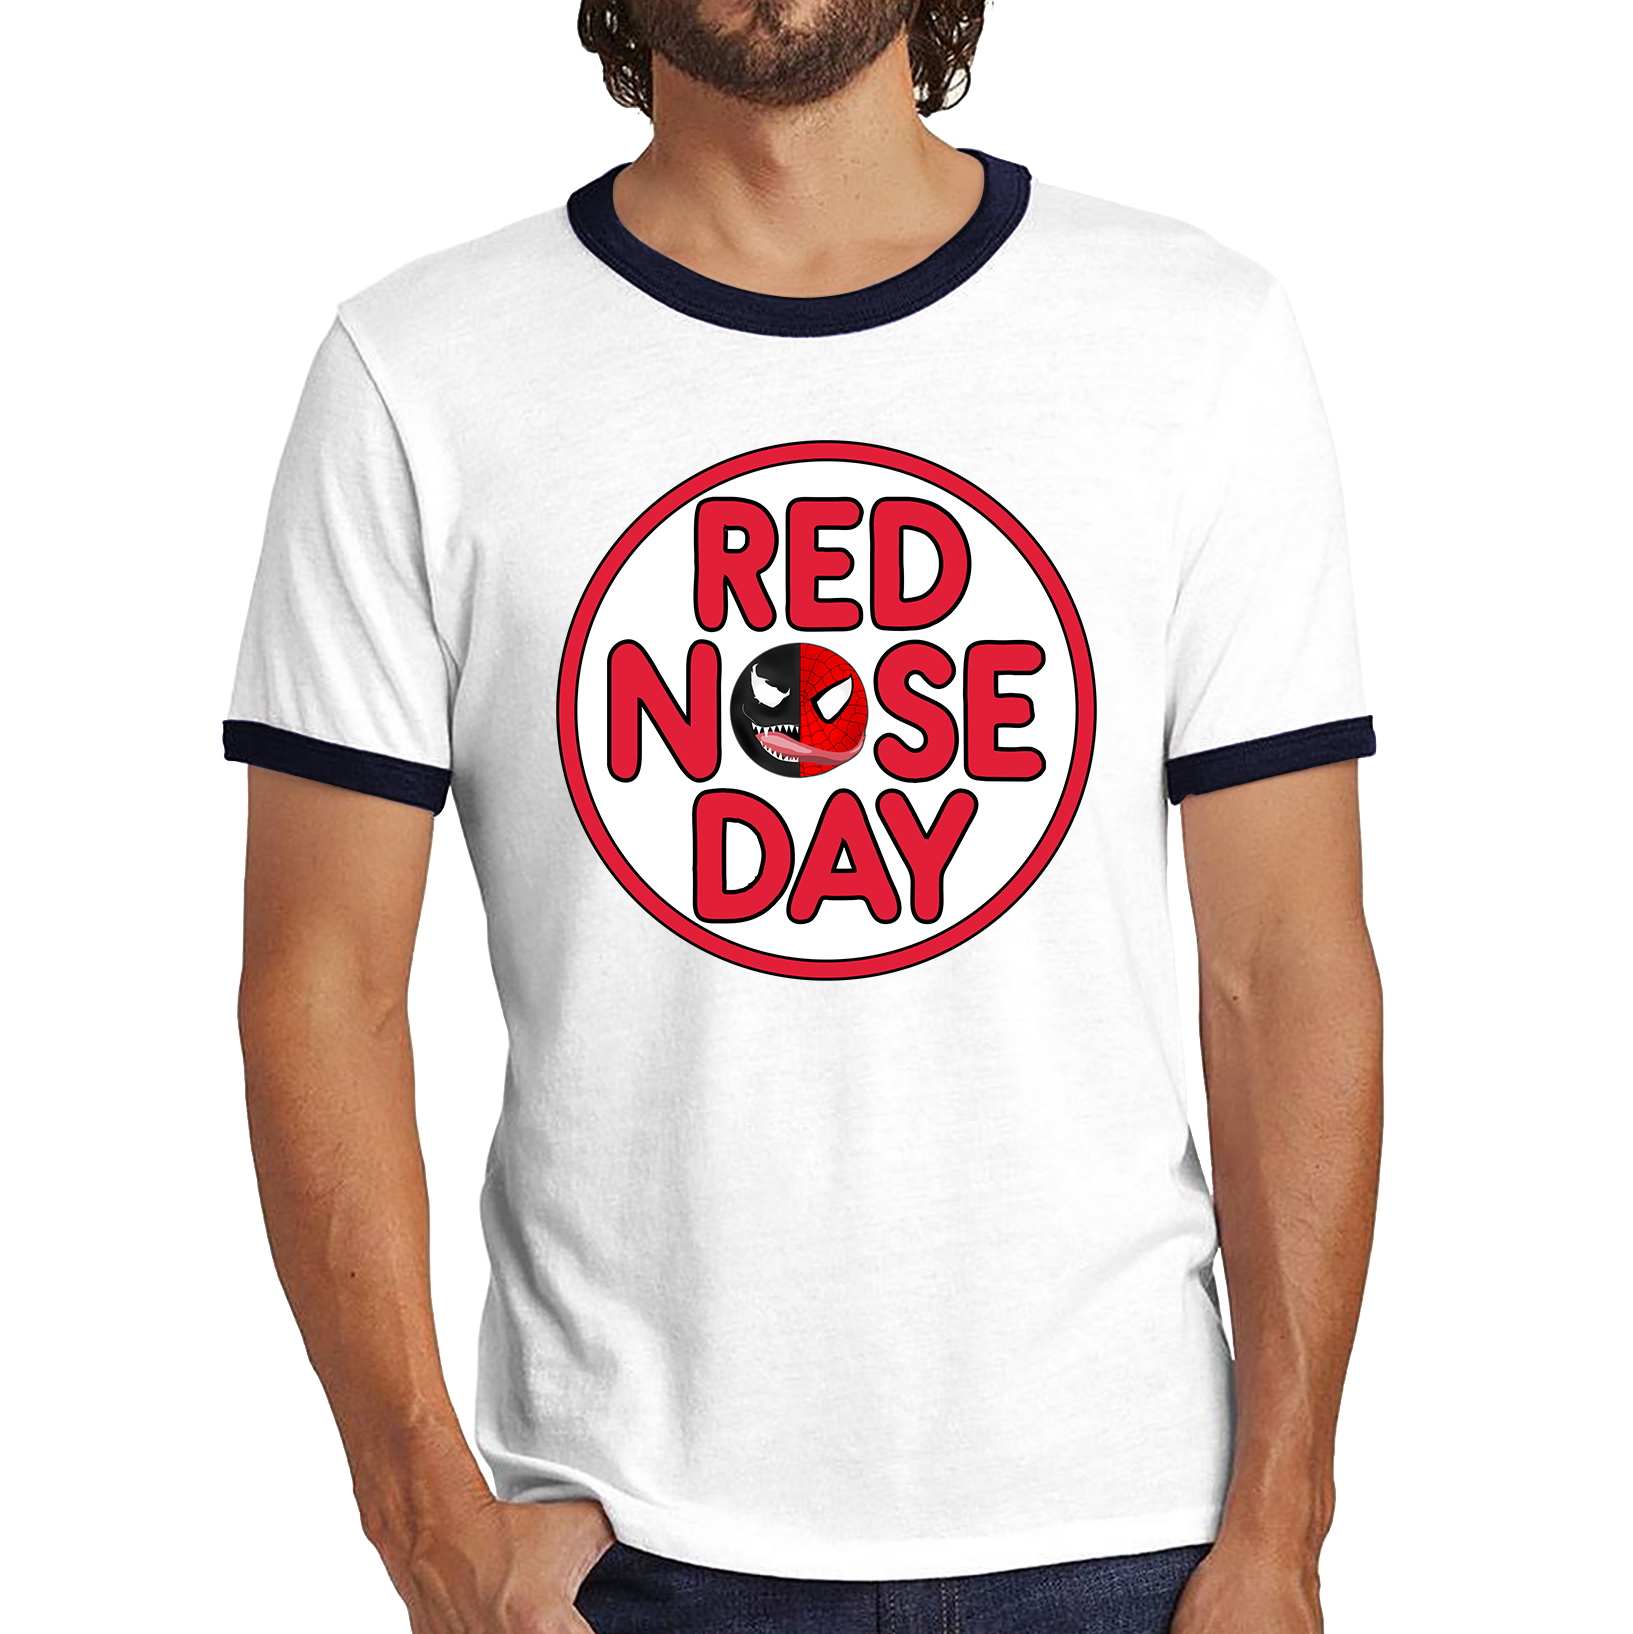 Marvel Venom Spiderman Red Nose Day Ringer T Shirt. 50% Goes To Charity